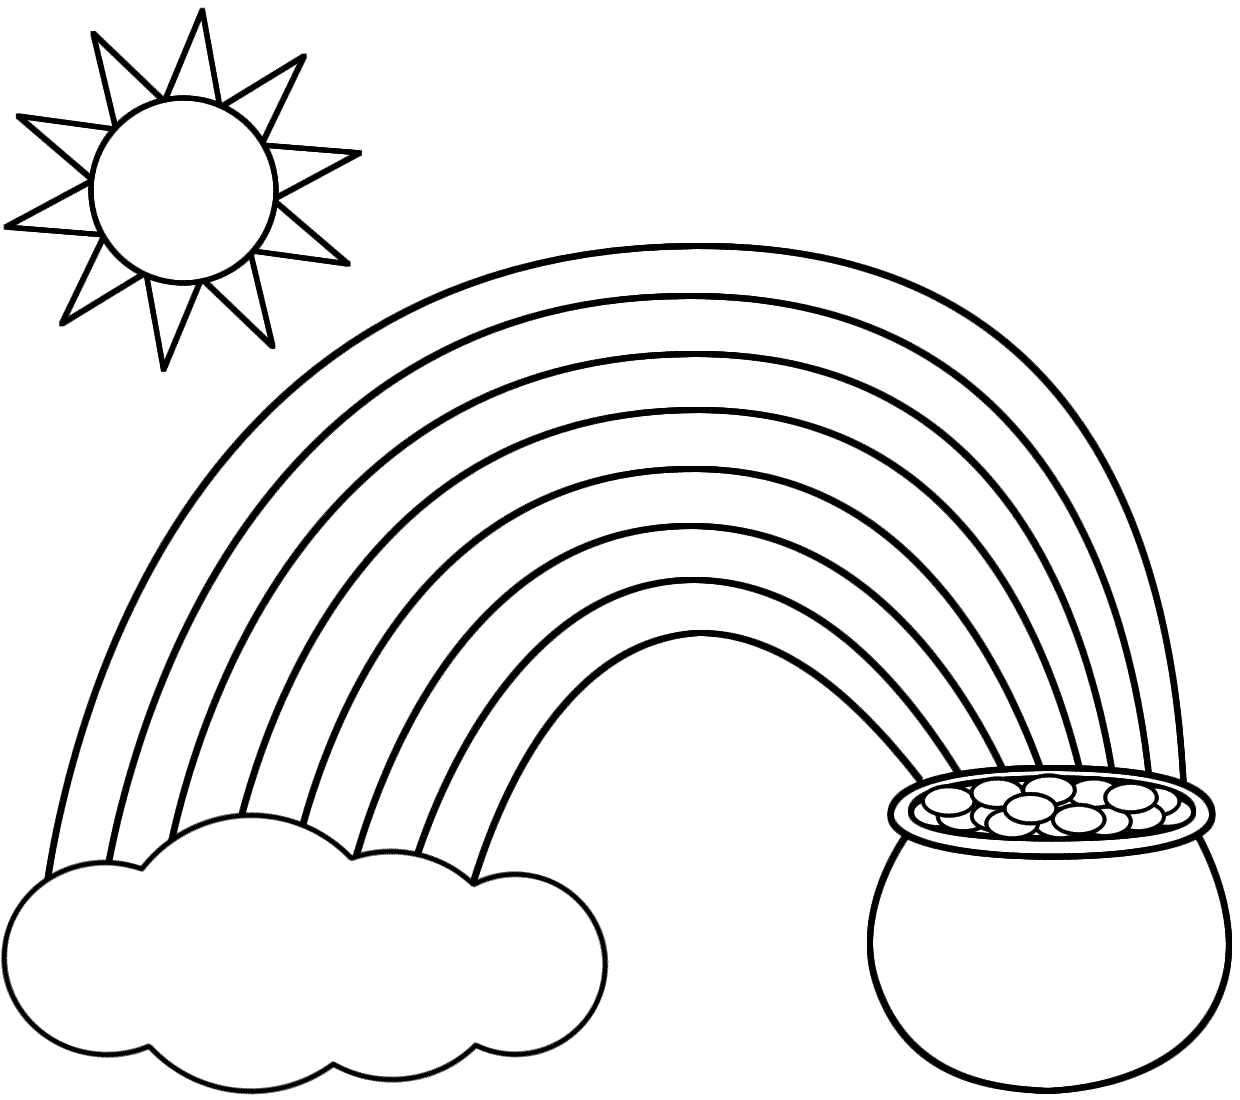 Free Preschool Coloring Pages Of Rainbows, Download Free